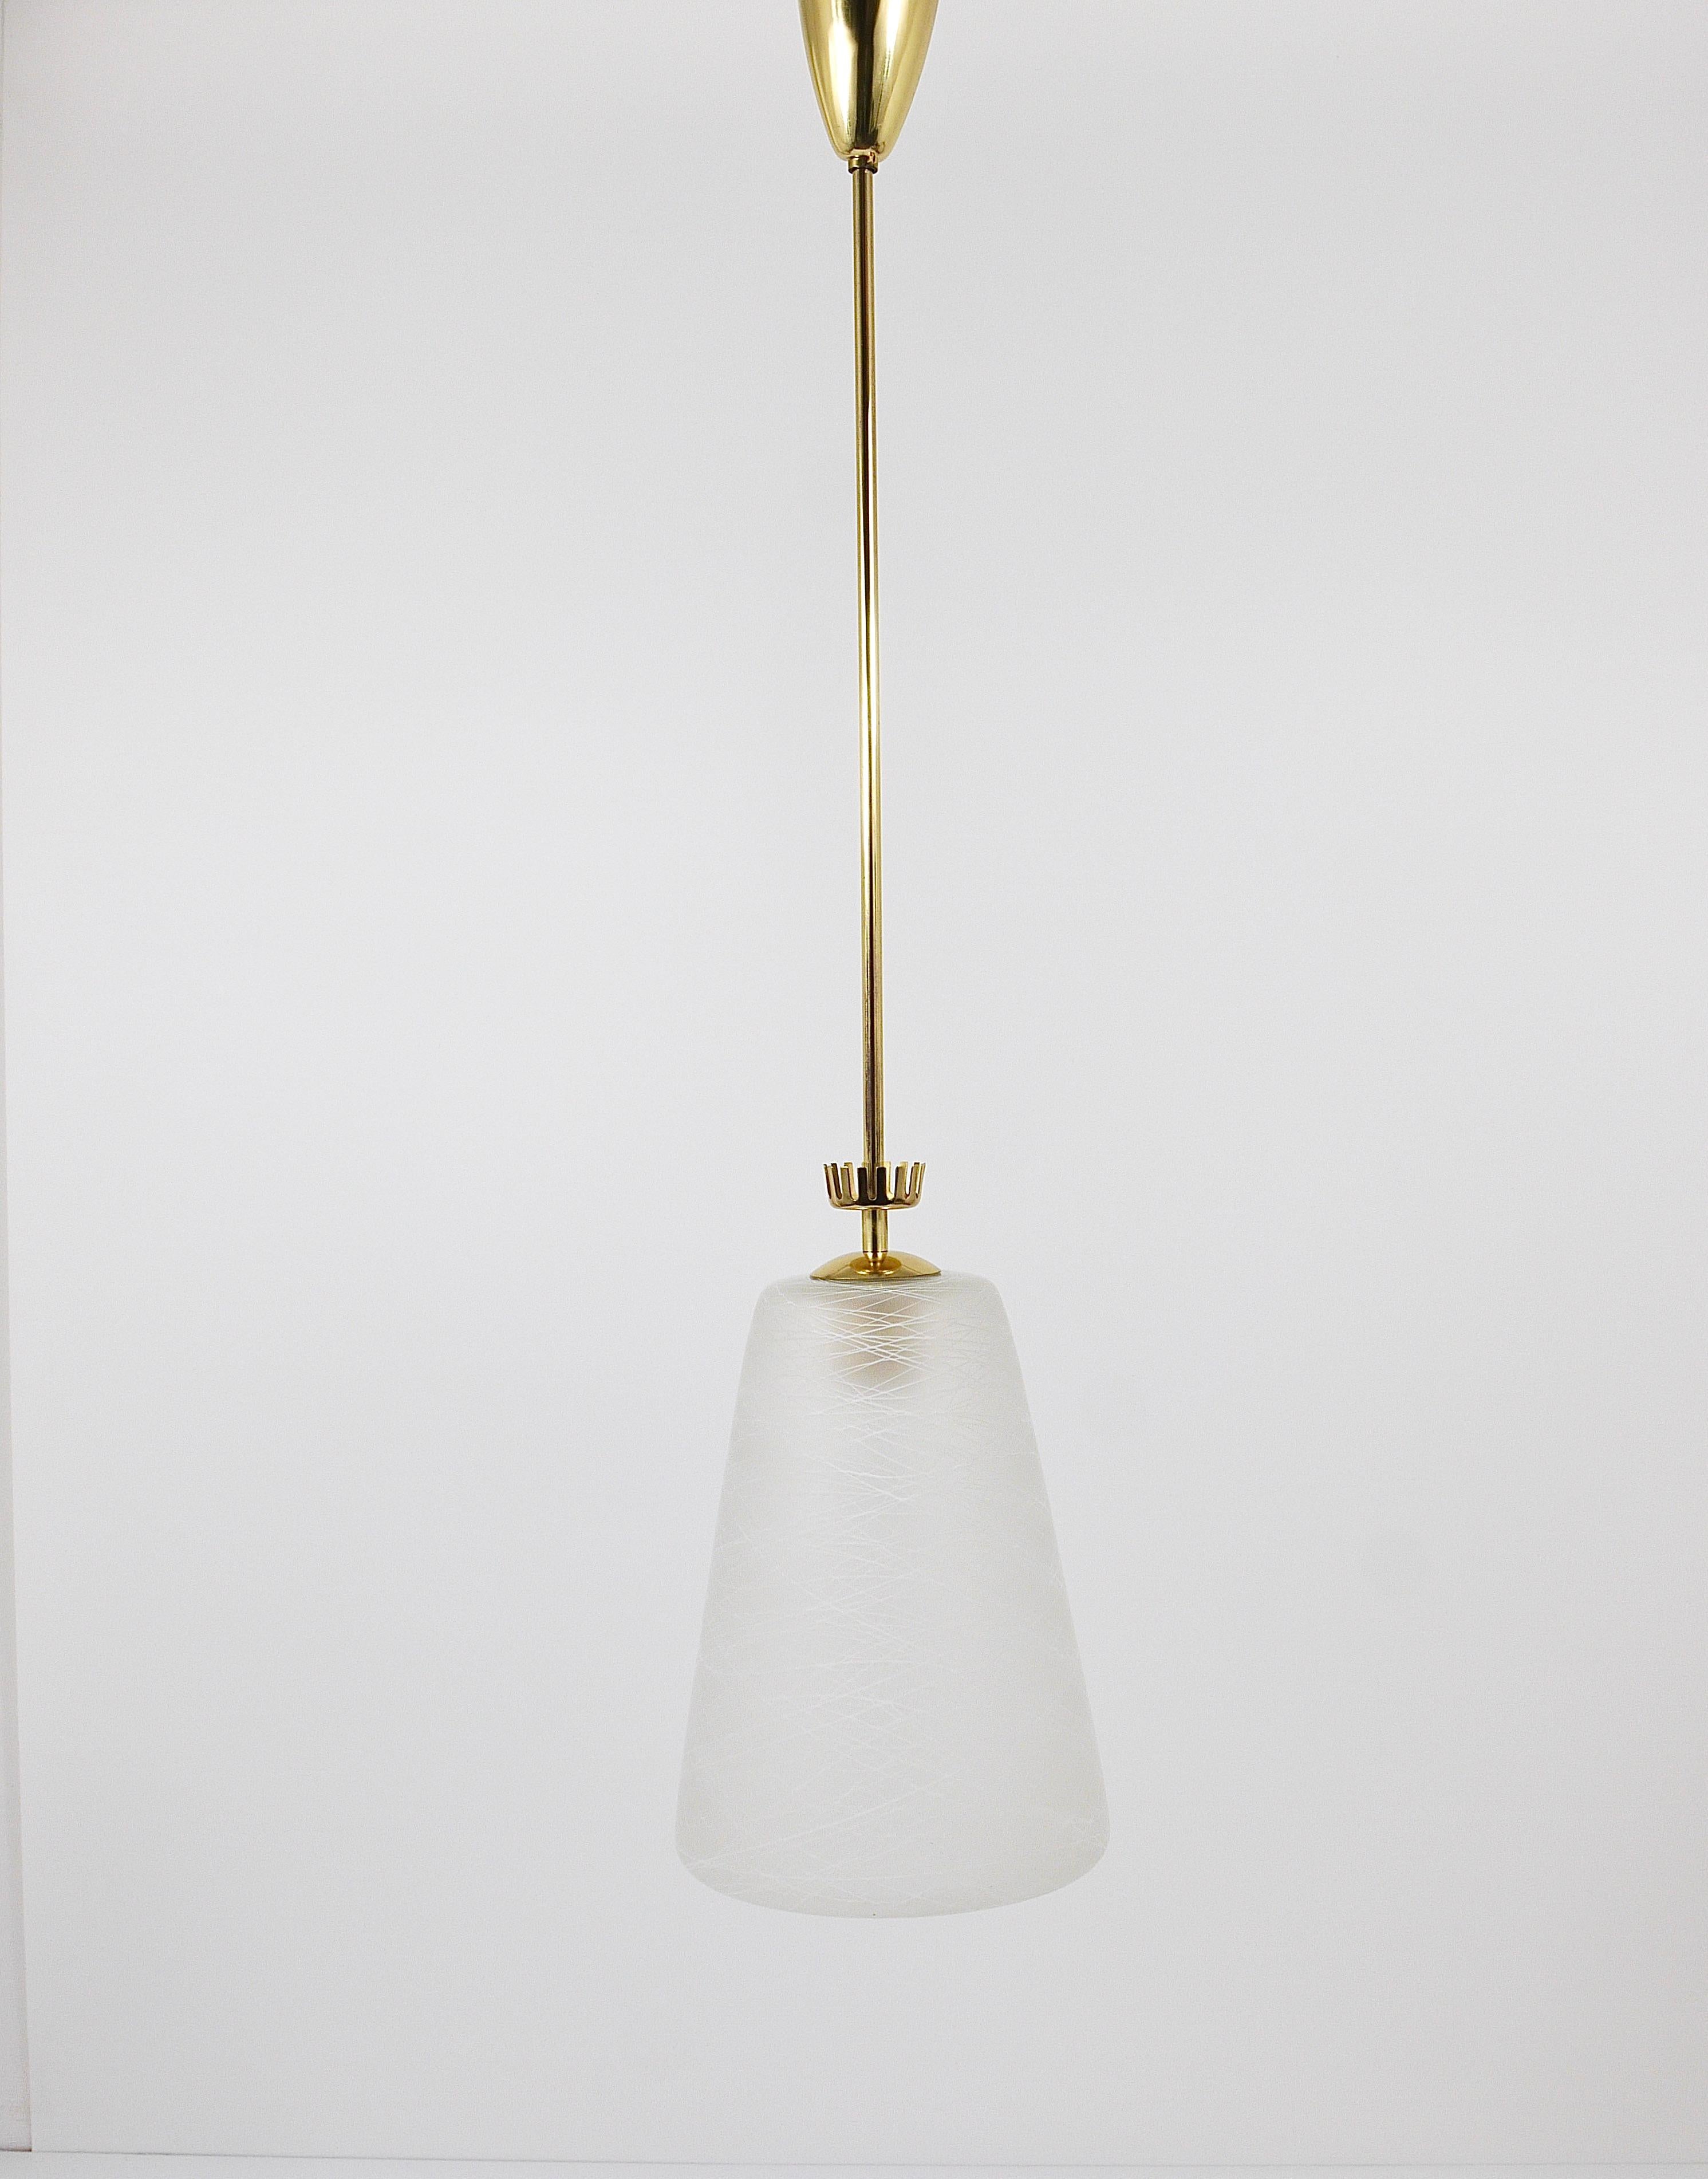 A charming Italian modernist ceiling light from the 1950s. Made of polished brass, it has a conical satined lampshade with a wonderful etched Mid-century pattern on it and a nice little brass crown on its top. The fixture offers one light source and